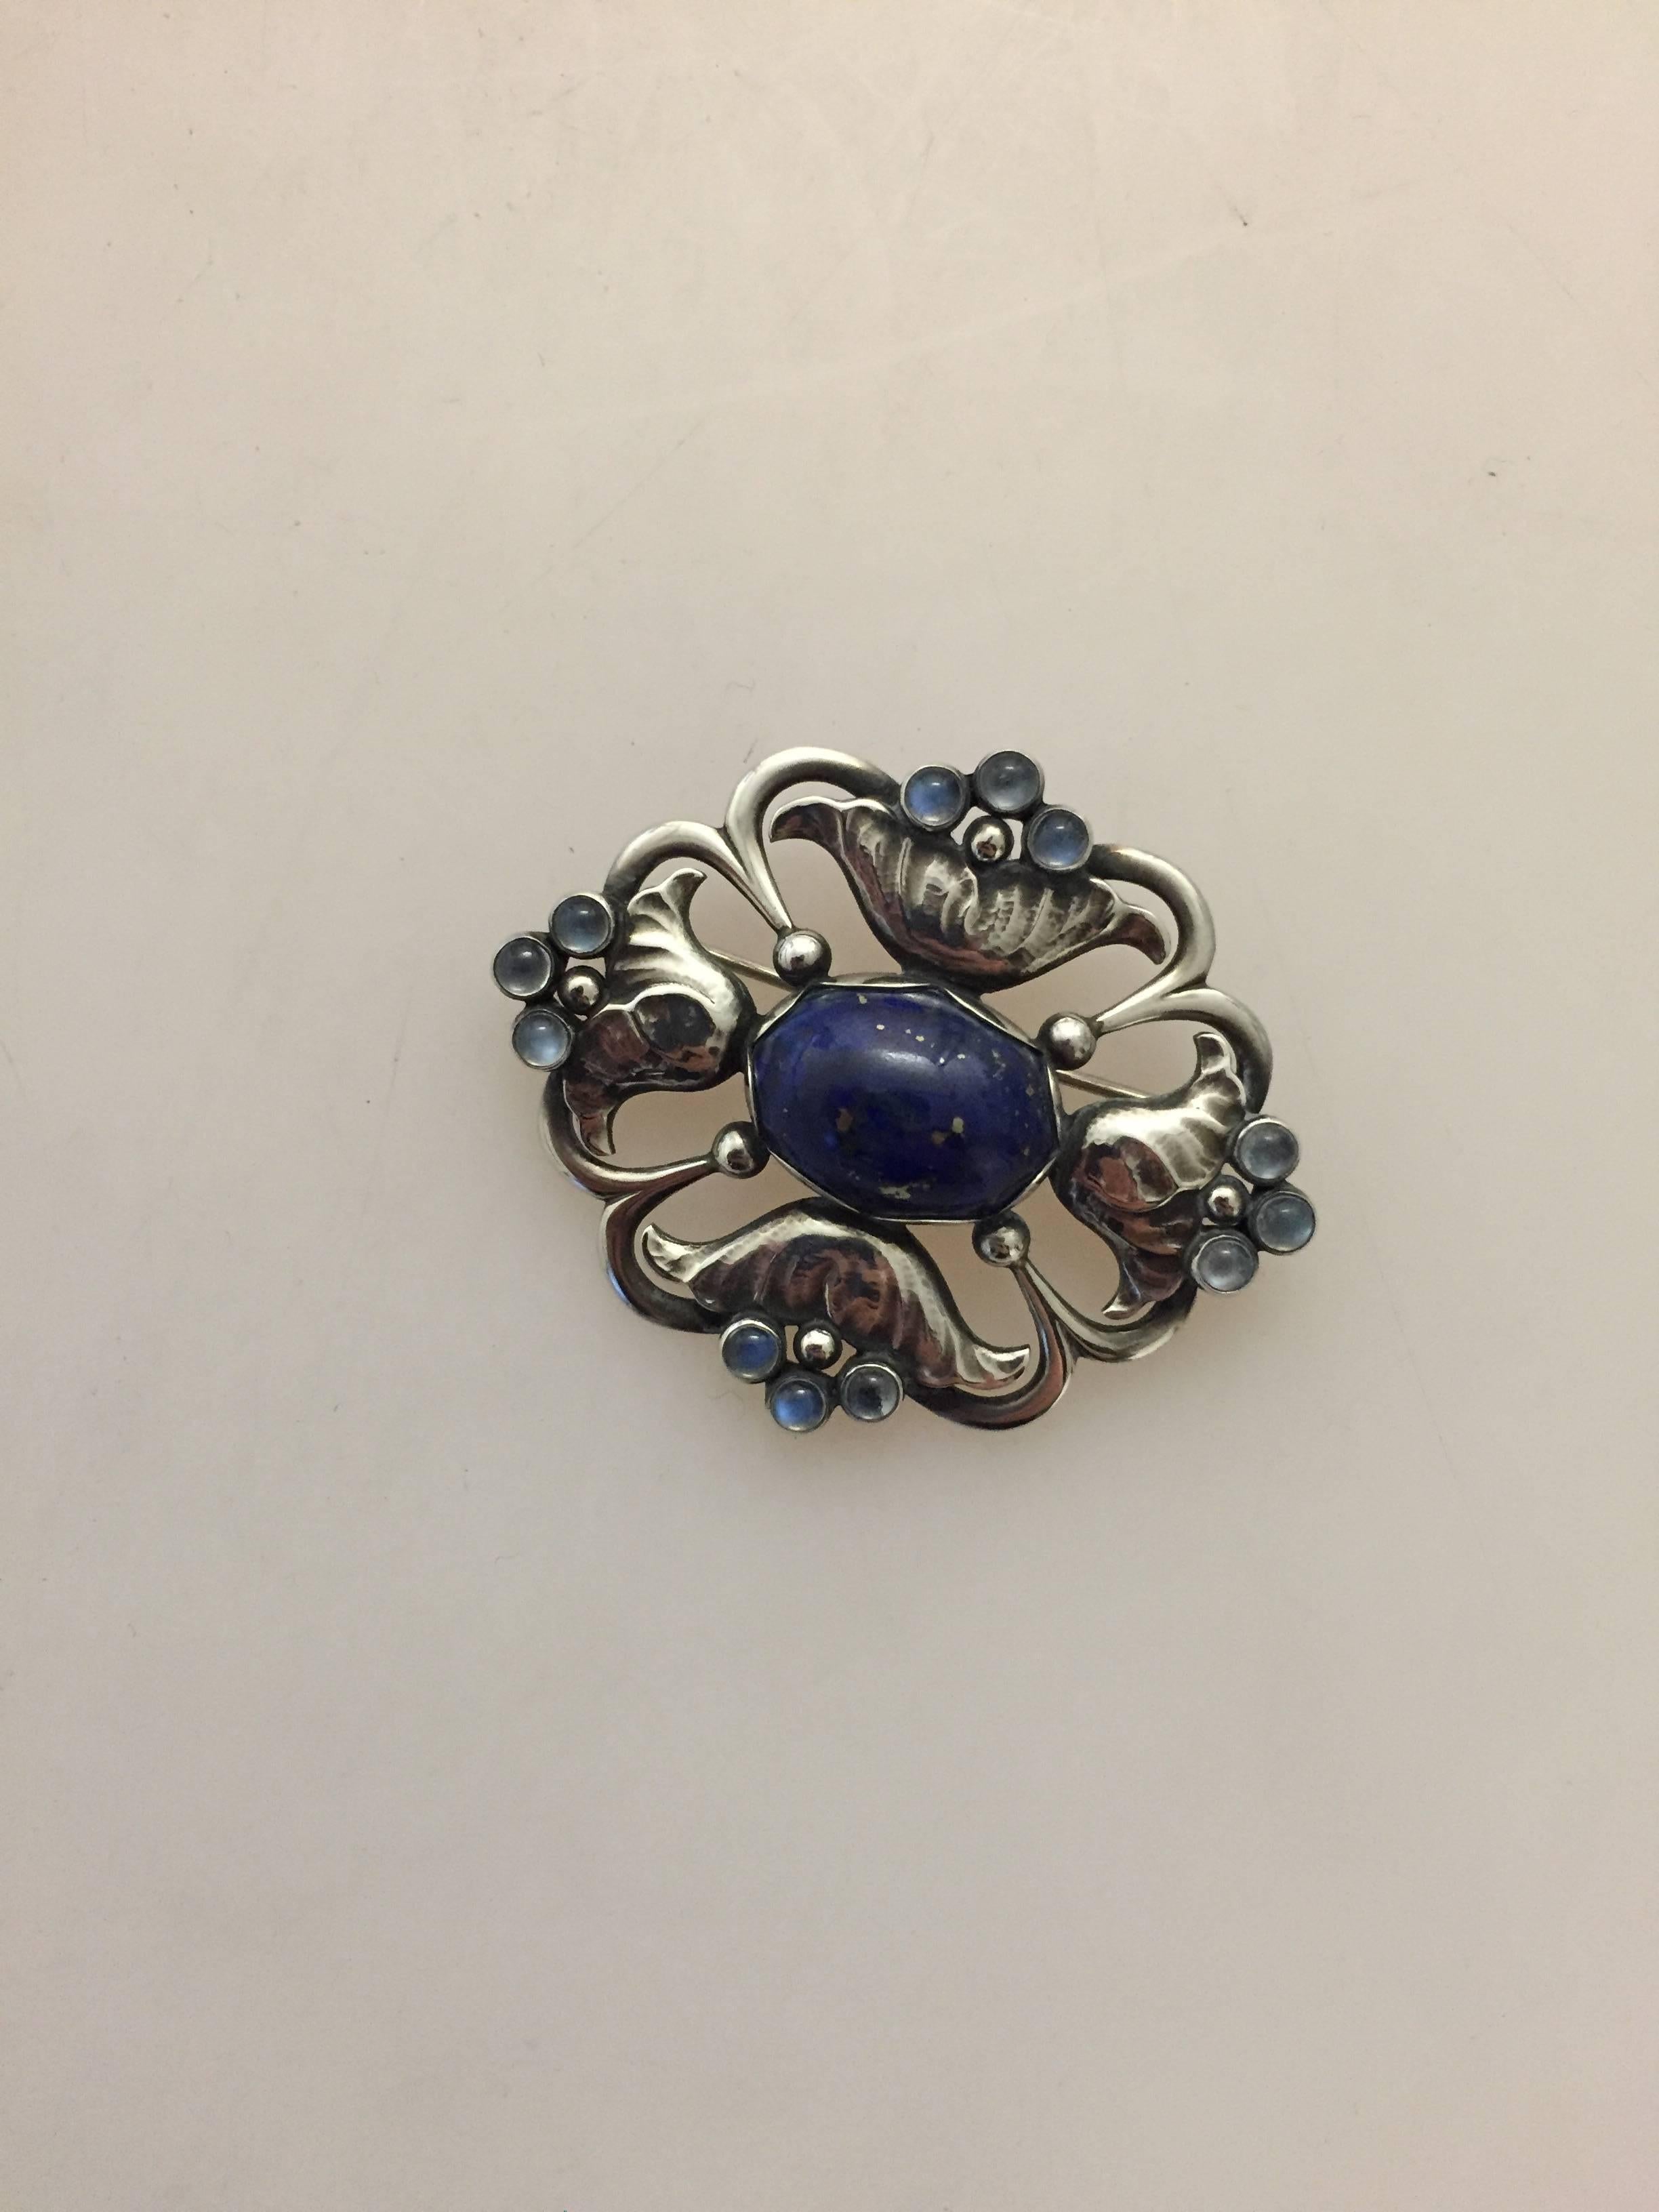 Georg Jensen Sterling Silver Brooch with Lapis Lazuli and Moonstones #173. From after 1945.

 Measures 5.3 cm x 4.3 cm (2 3/32